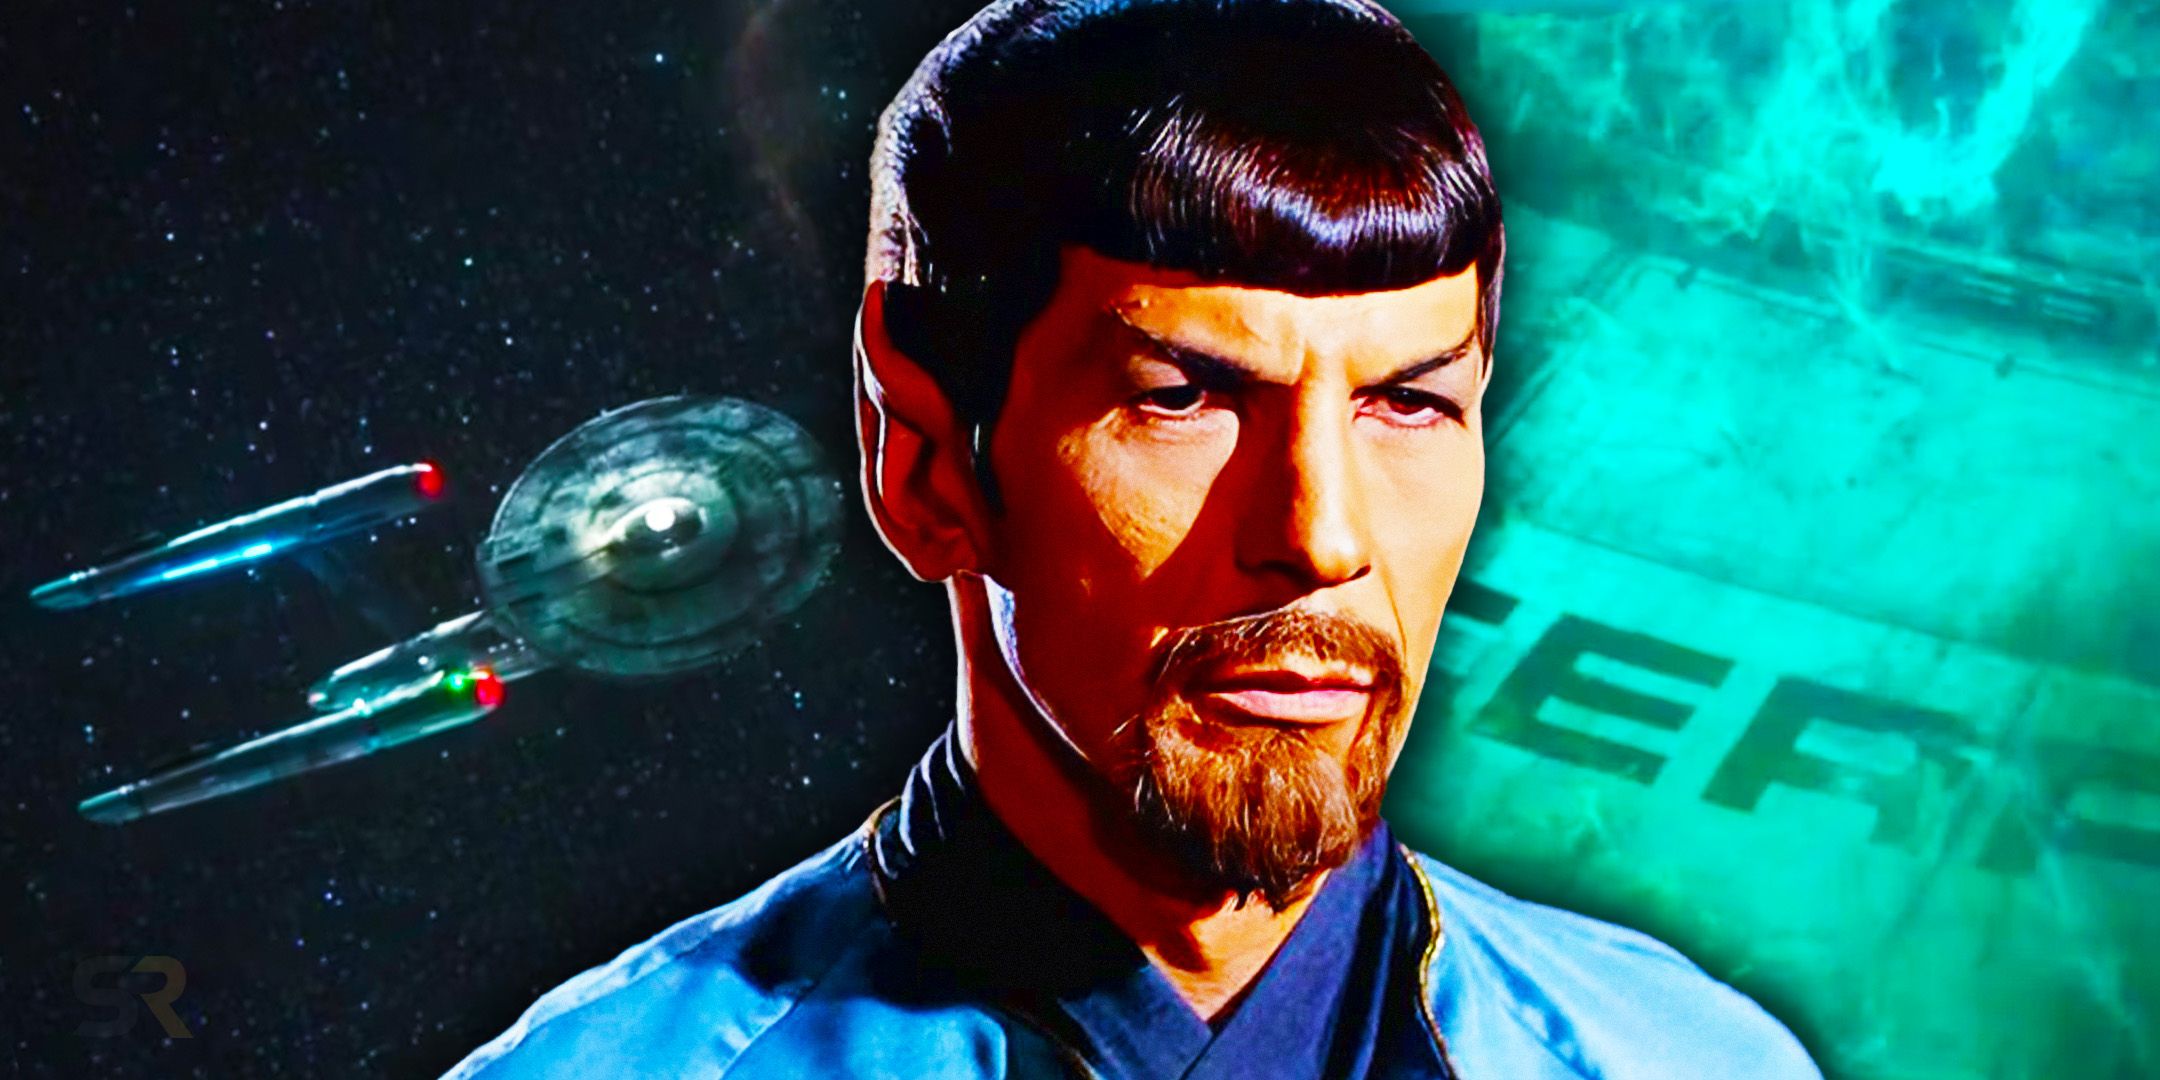 Leonard Nimoy with goatee as Mirror Universe Spock with the ISS Enterprise behind him.